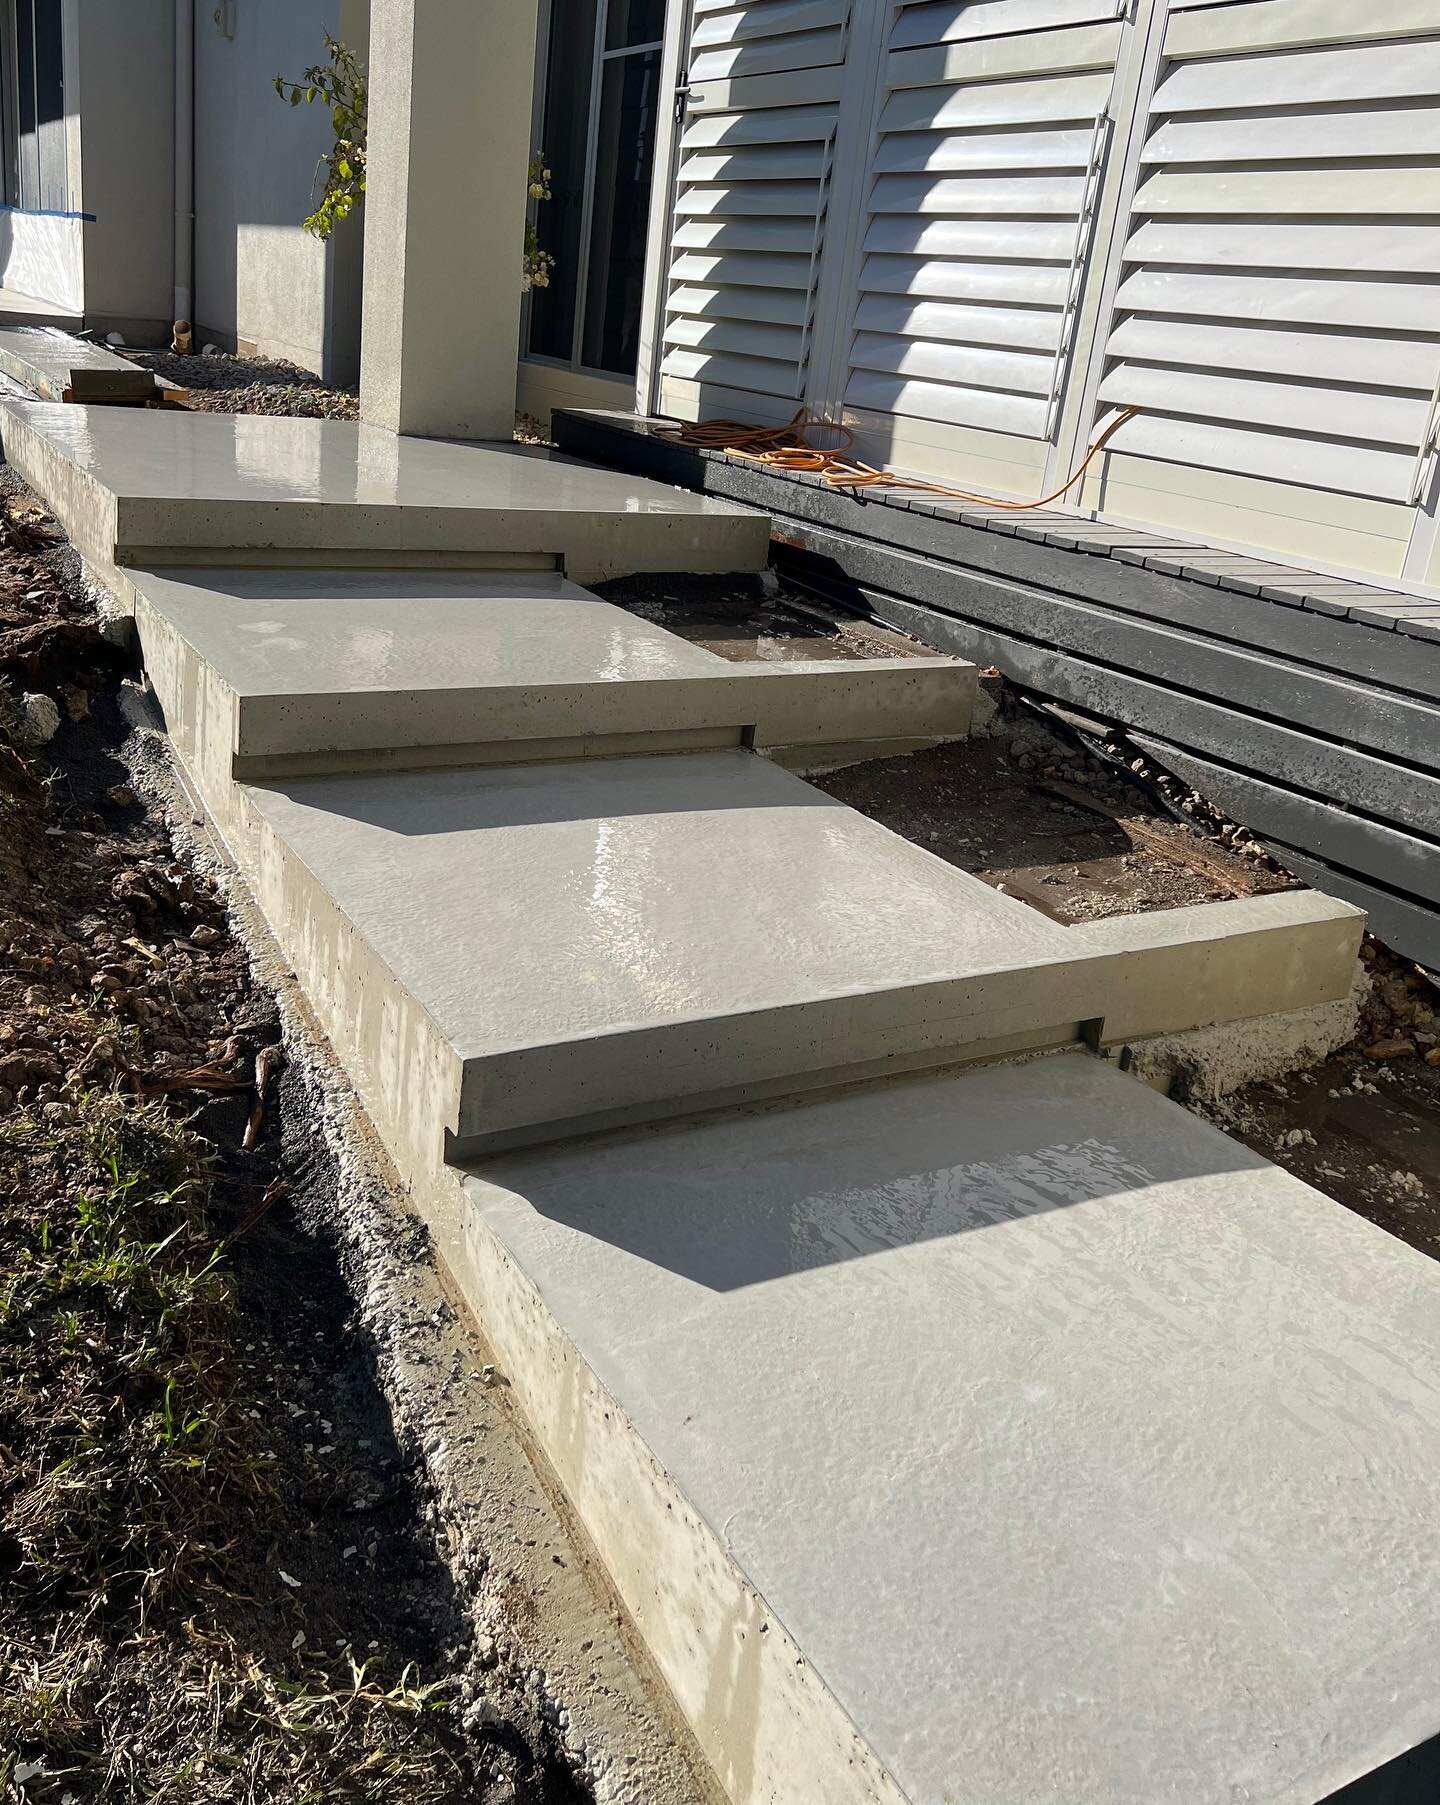 Stairs with 50mm shadow line using &lsquo;Tilga&rsquo; by @geostoneholcim. Stay tuned for the finished product.. can&rsquo;t wait to see these once honed &amp; polished 👀